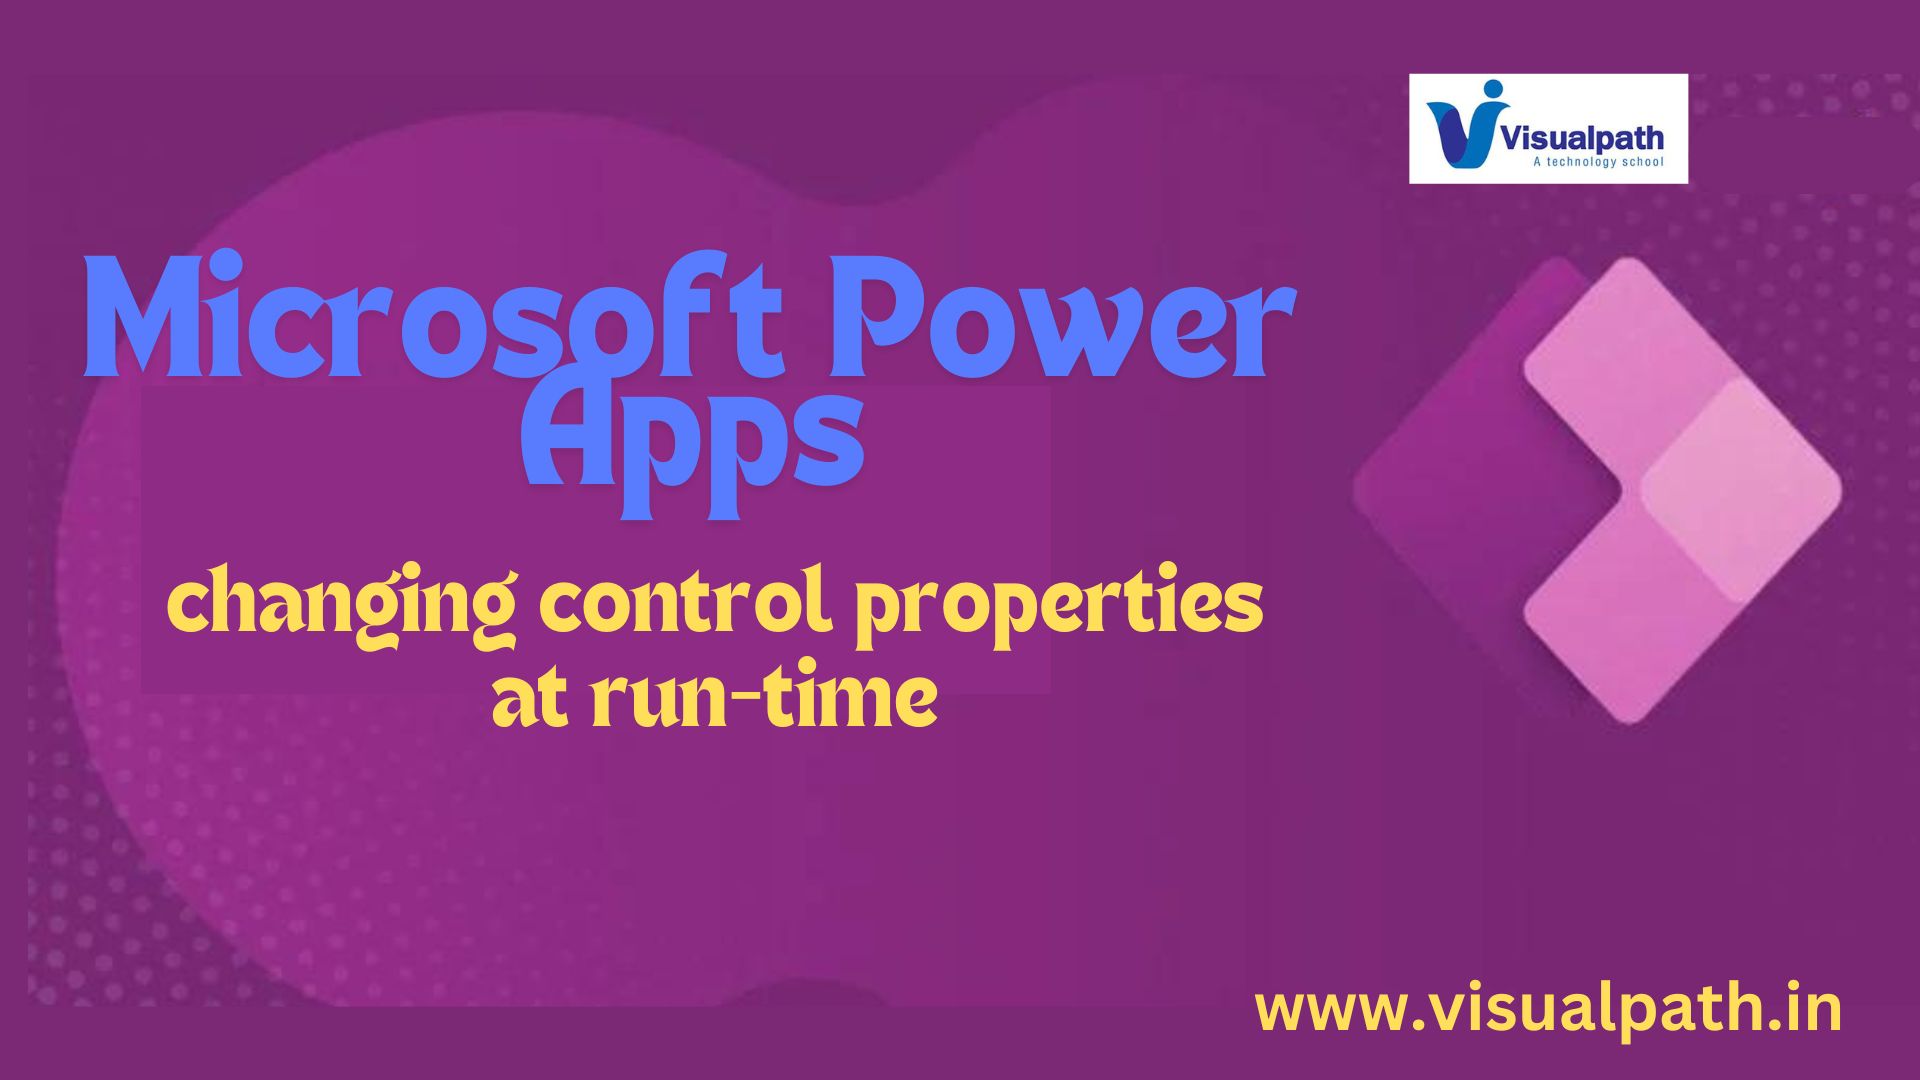 Microsoft Power Apps? Dynamically changing control properties at run-time